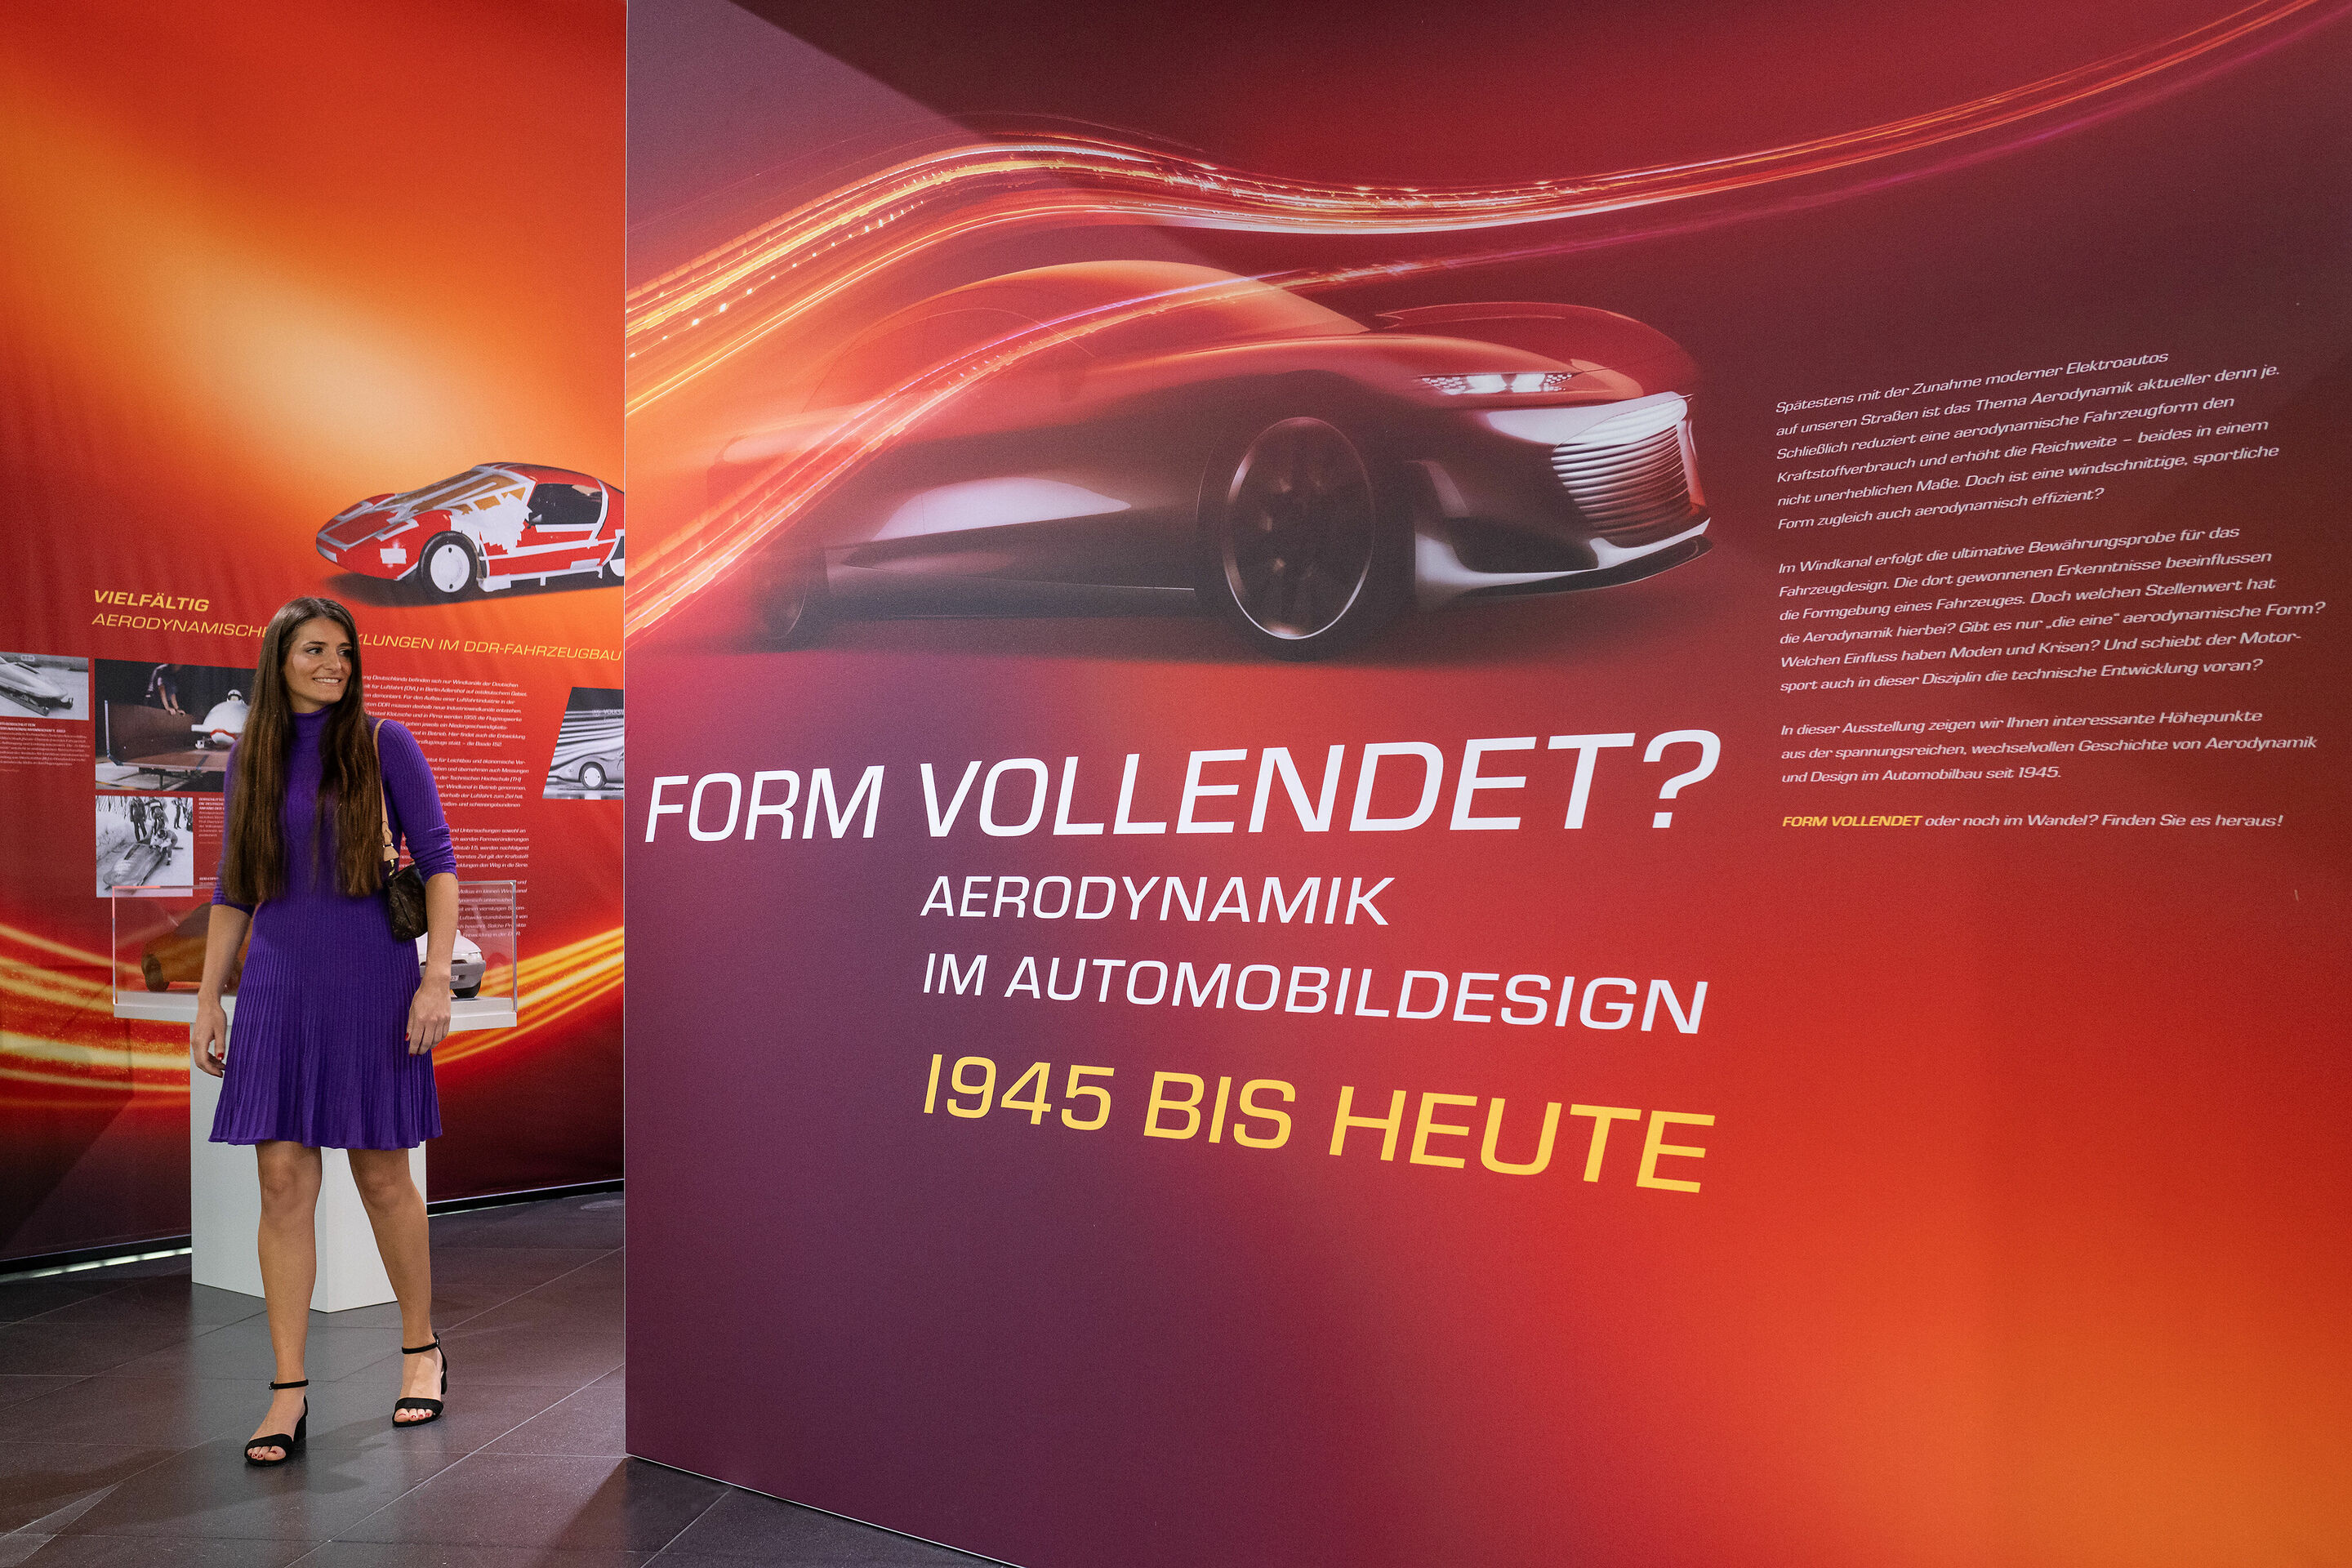 After “Windschnittig” comes “Form vollendet”: A new special exhibition at the Audi museum mobile